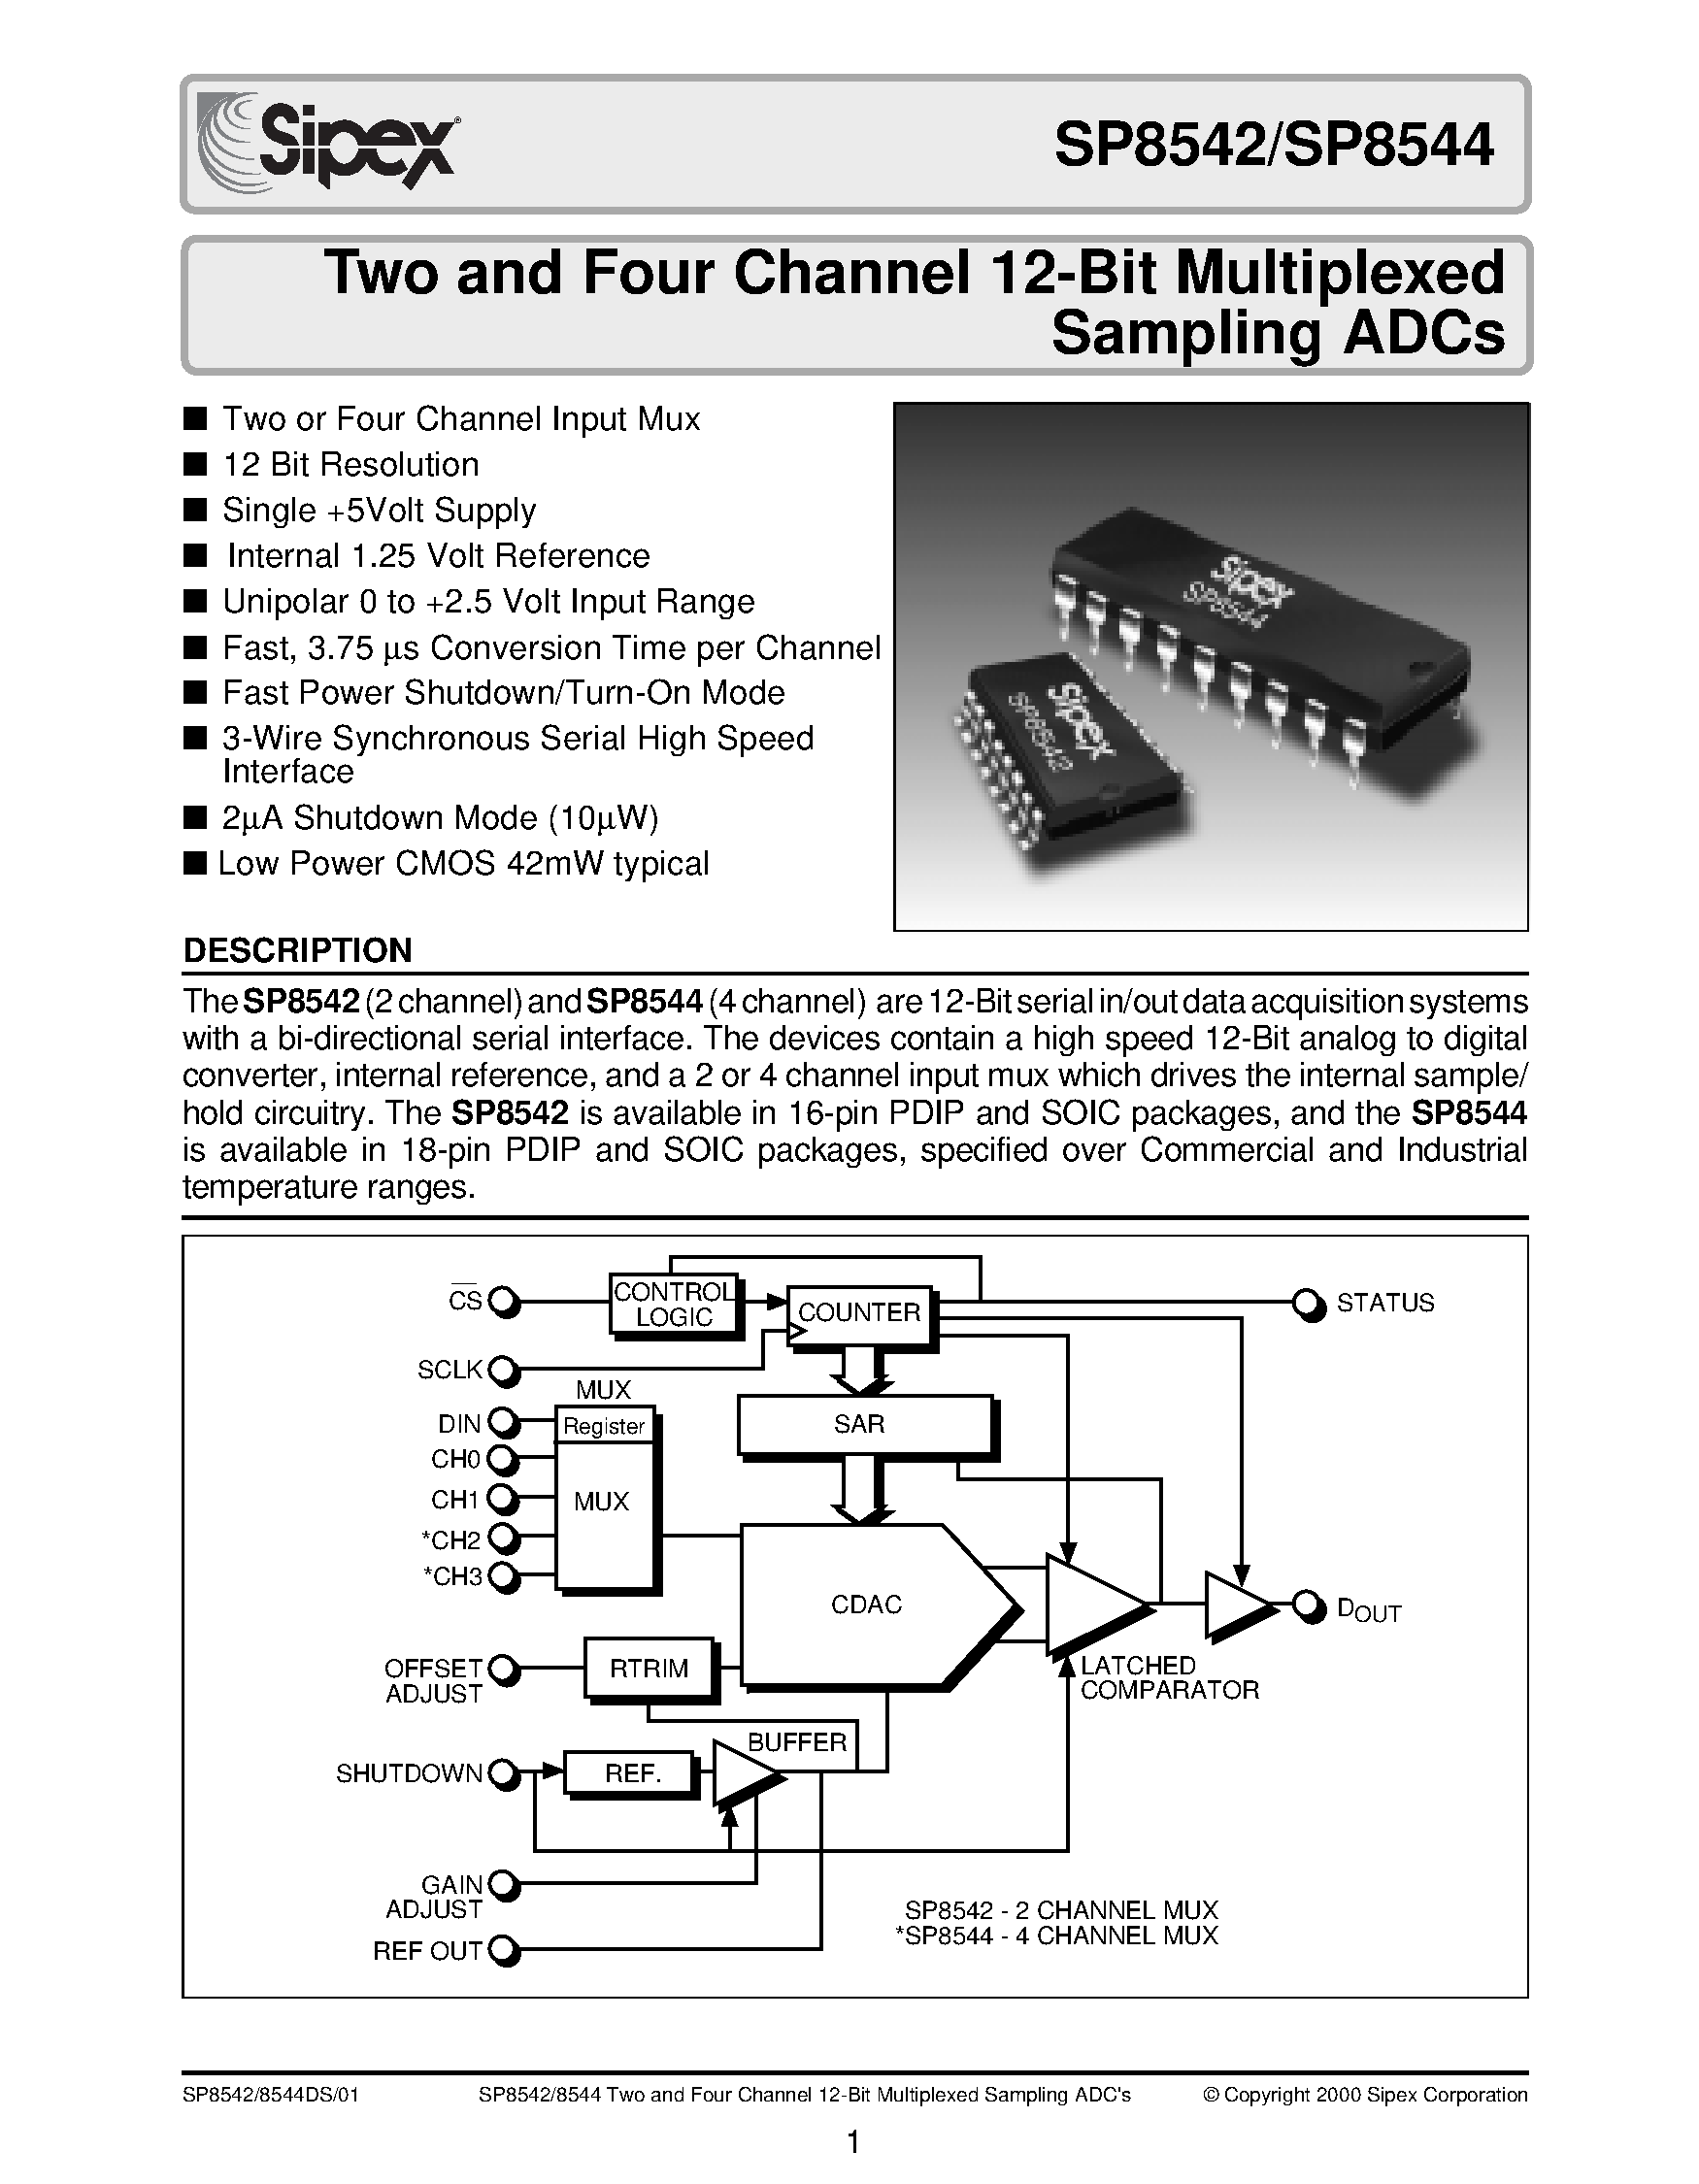 Datasheet SP8542AS - Two and Four Channel 12-Bit Multiplexed Sampling ADCs page 1